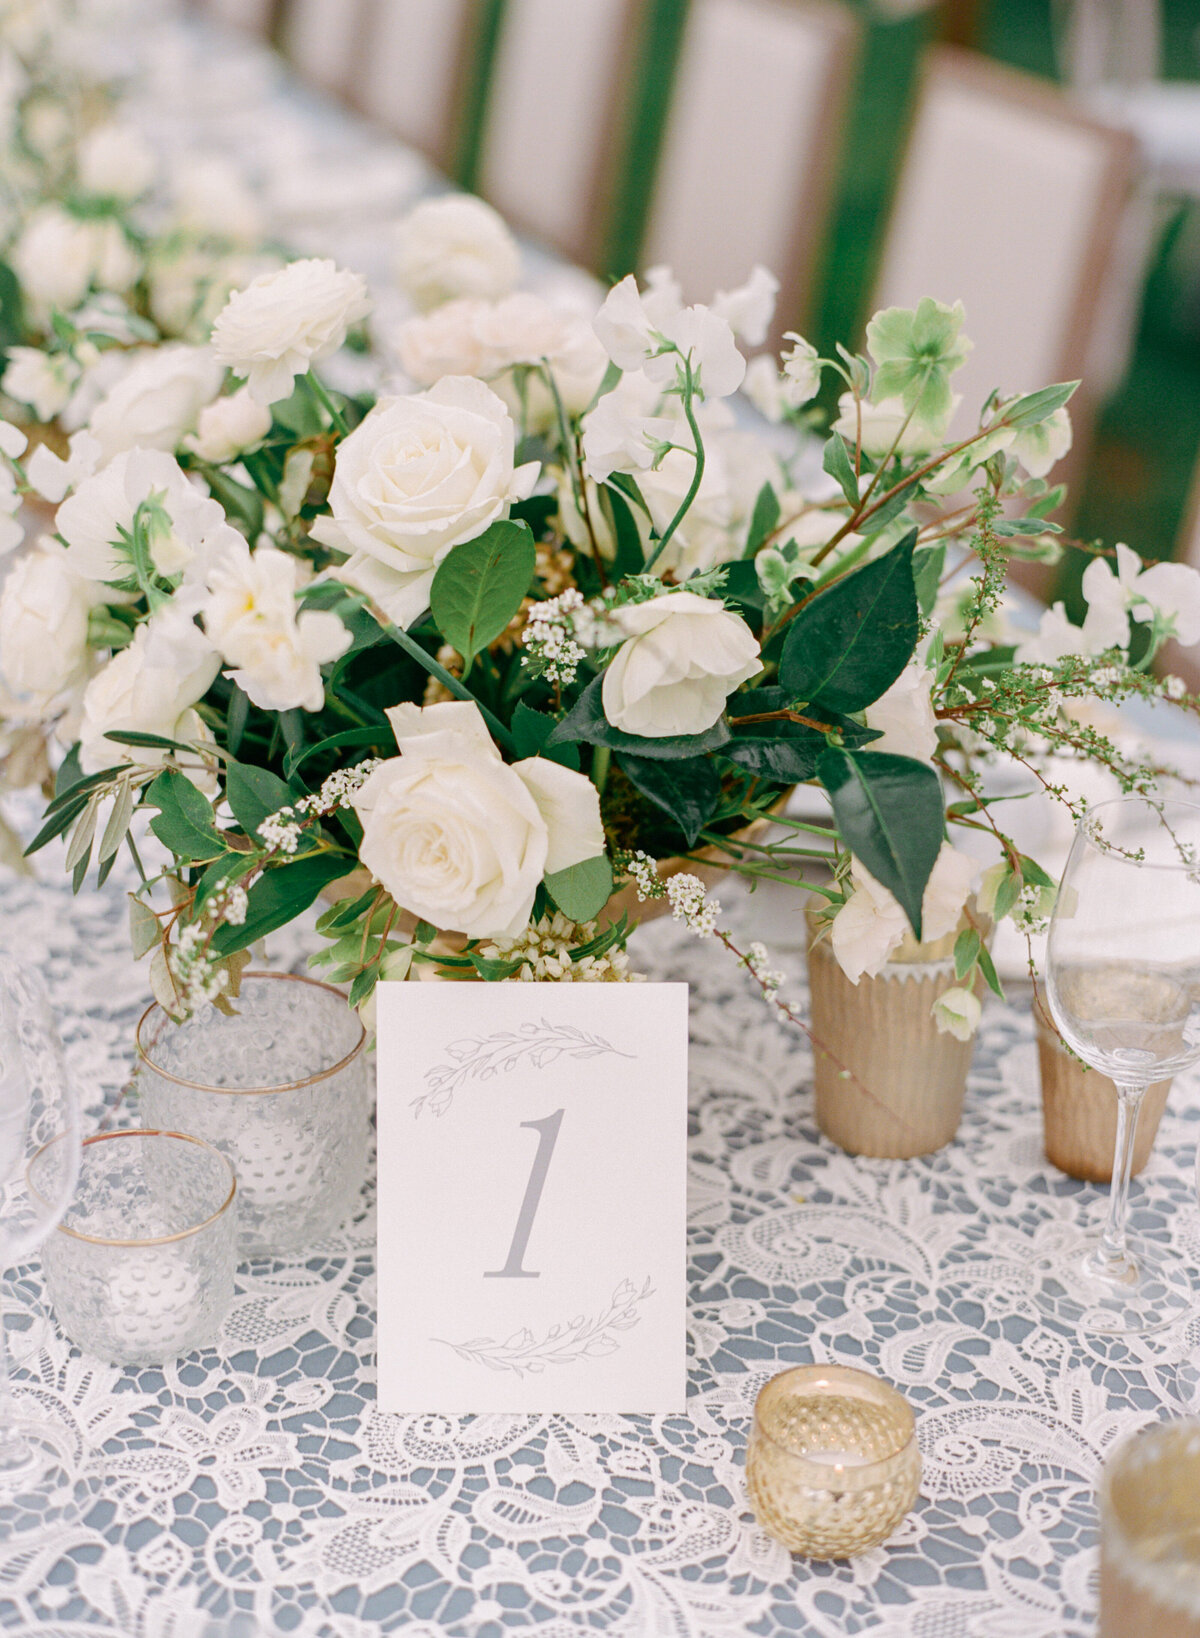 29-wedding-estate-table-lace-runner